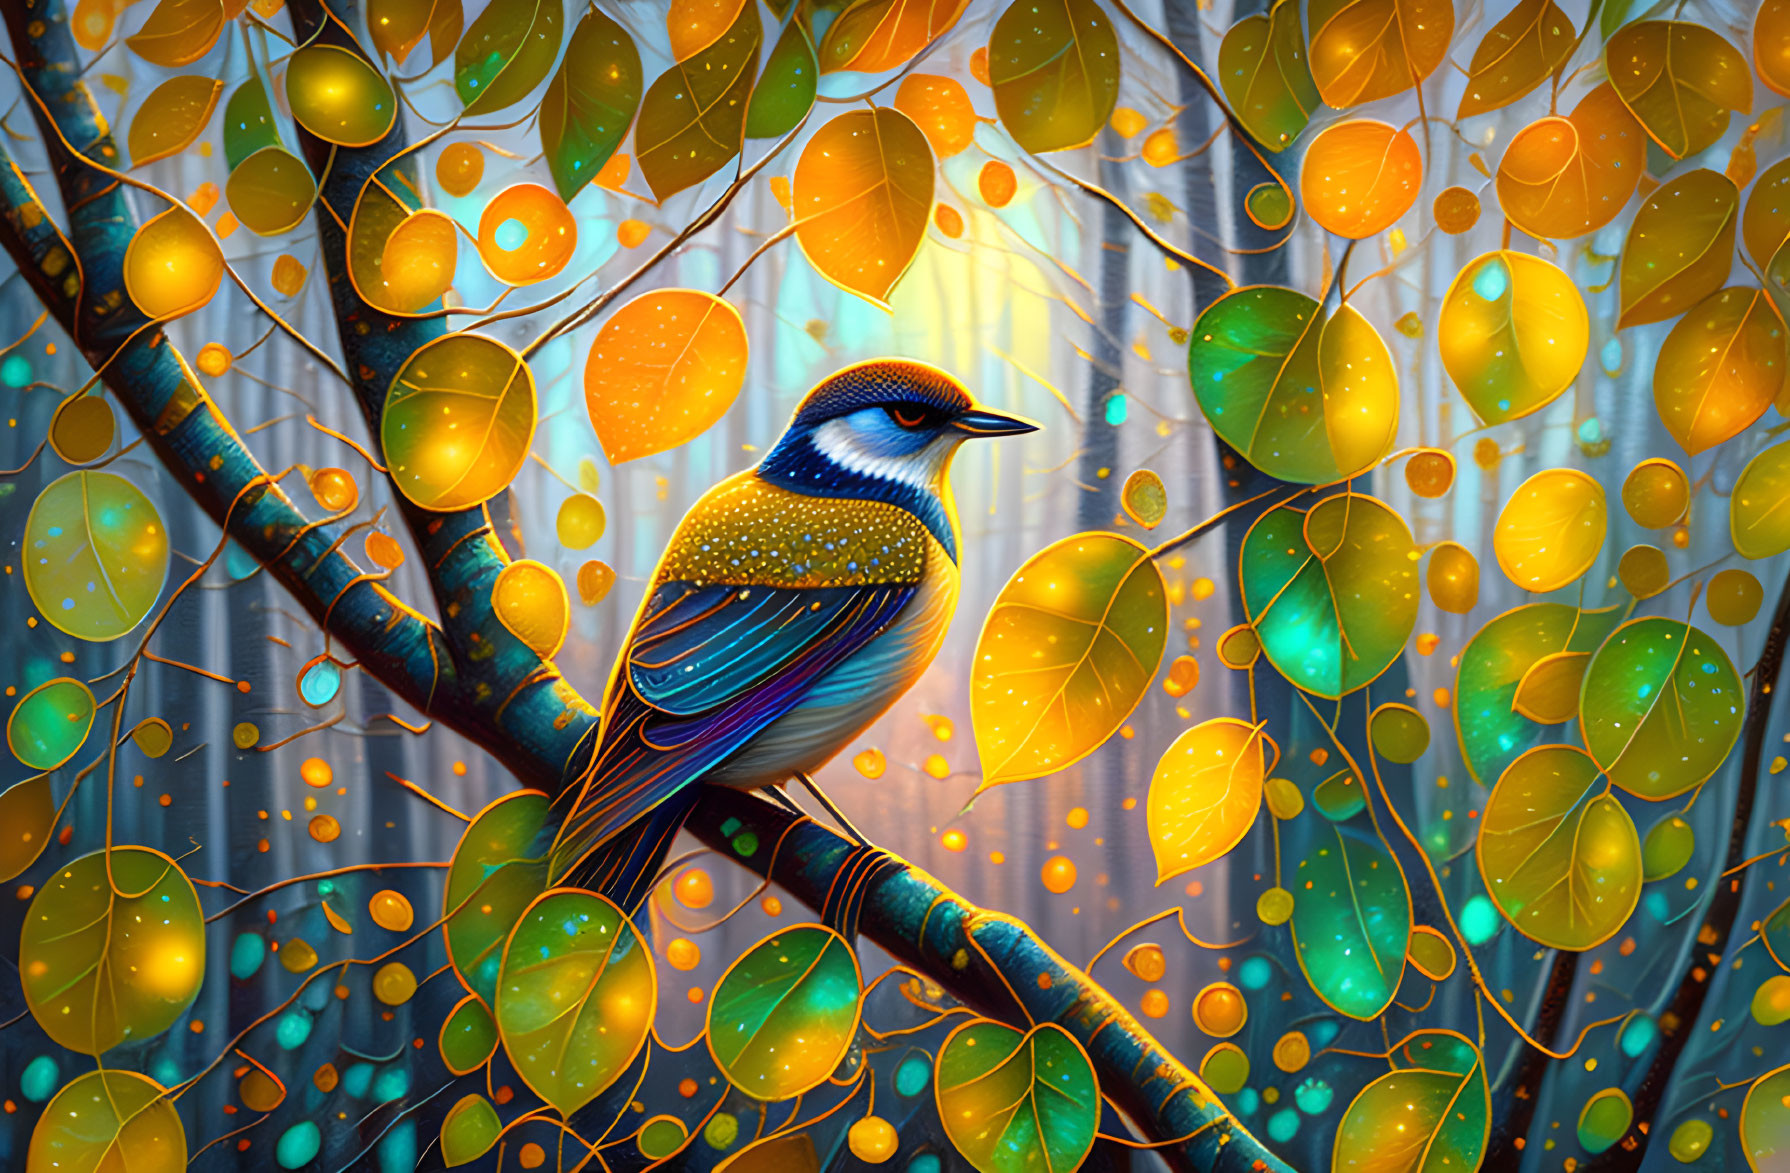 Colorful bird on branch with golden leaves and shimmering light - fantasy meets nature